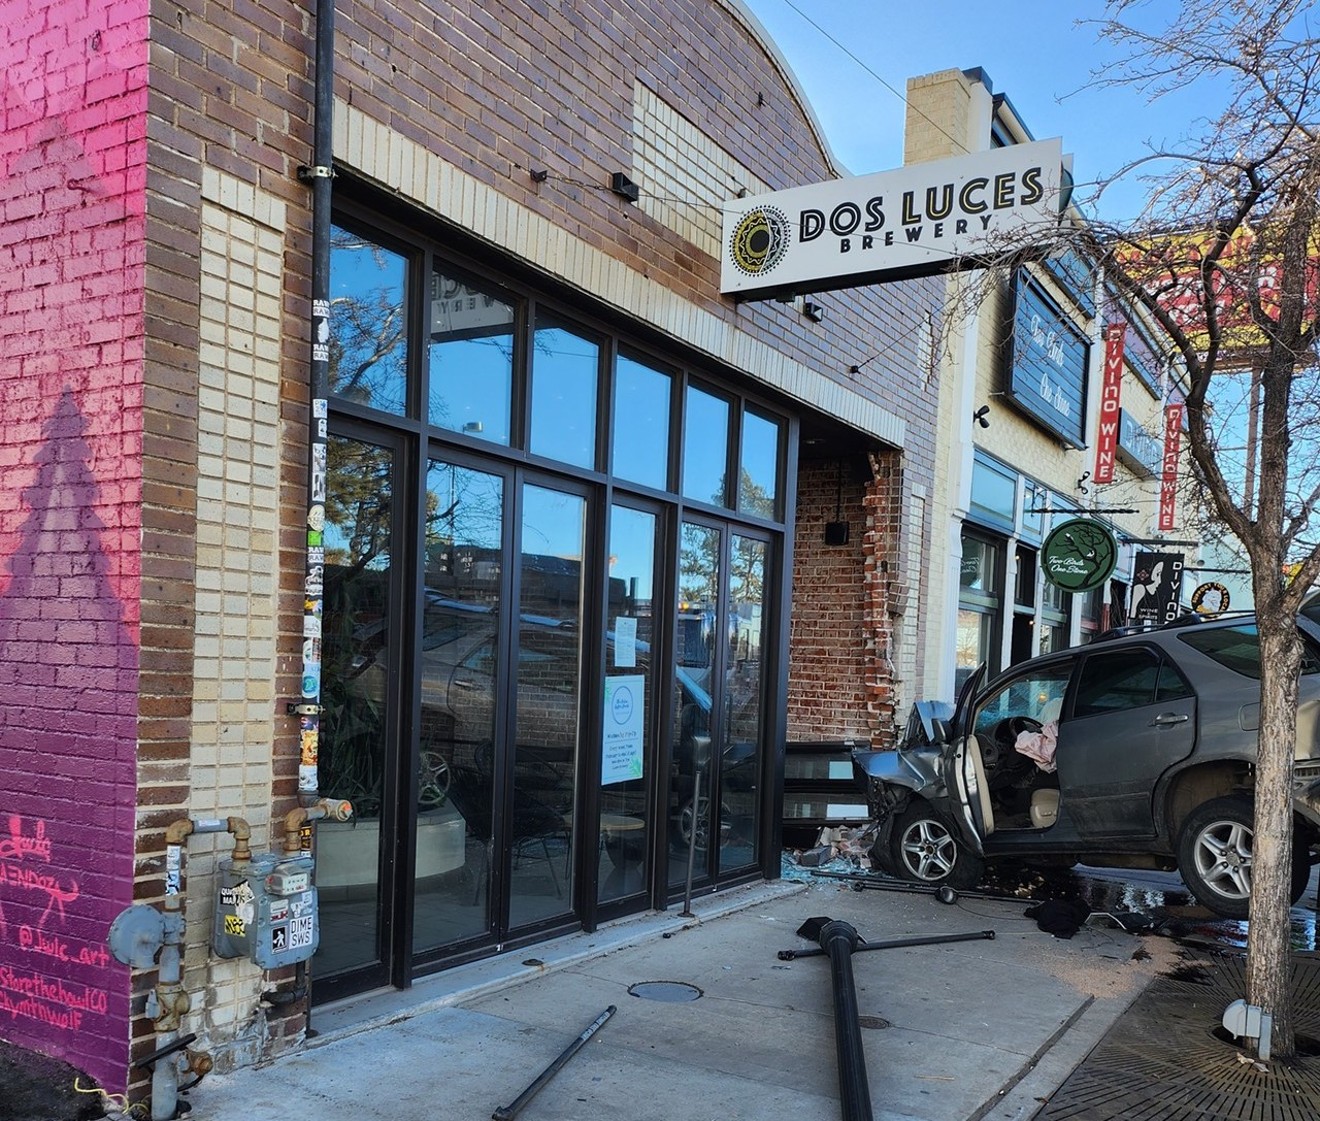 A car crashed into the front of Dos Luces early on Tuesday, February 21.